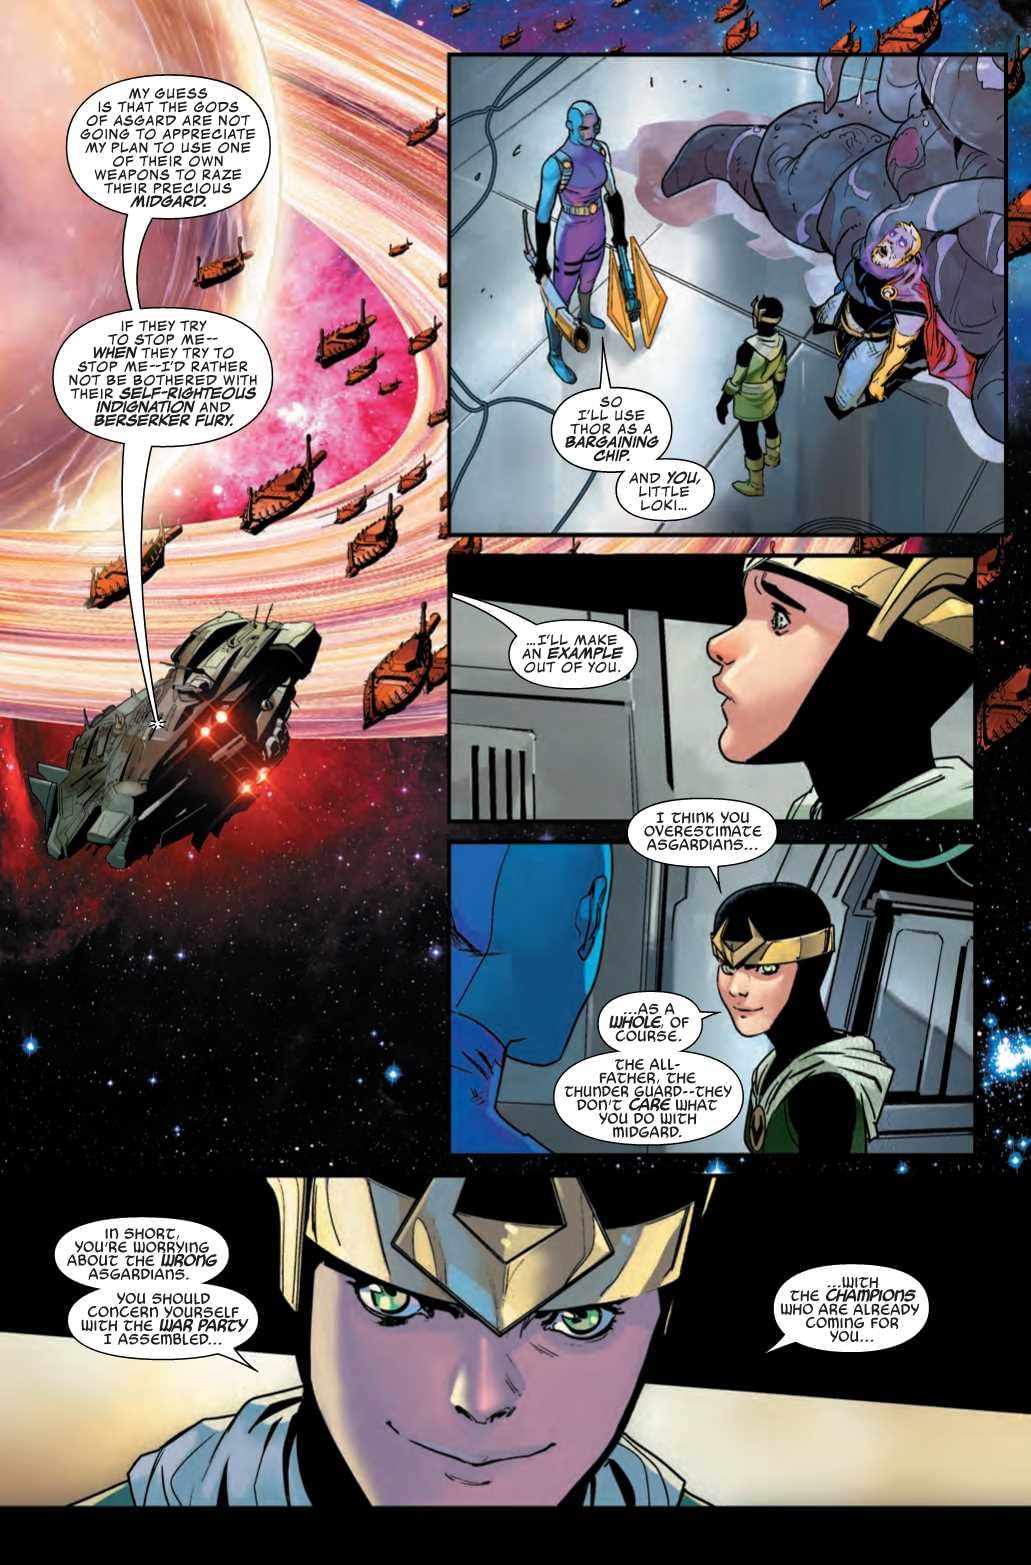 Loki's Fate and a New Nova in Next Week's Asgardians of the Galaxy #5